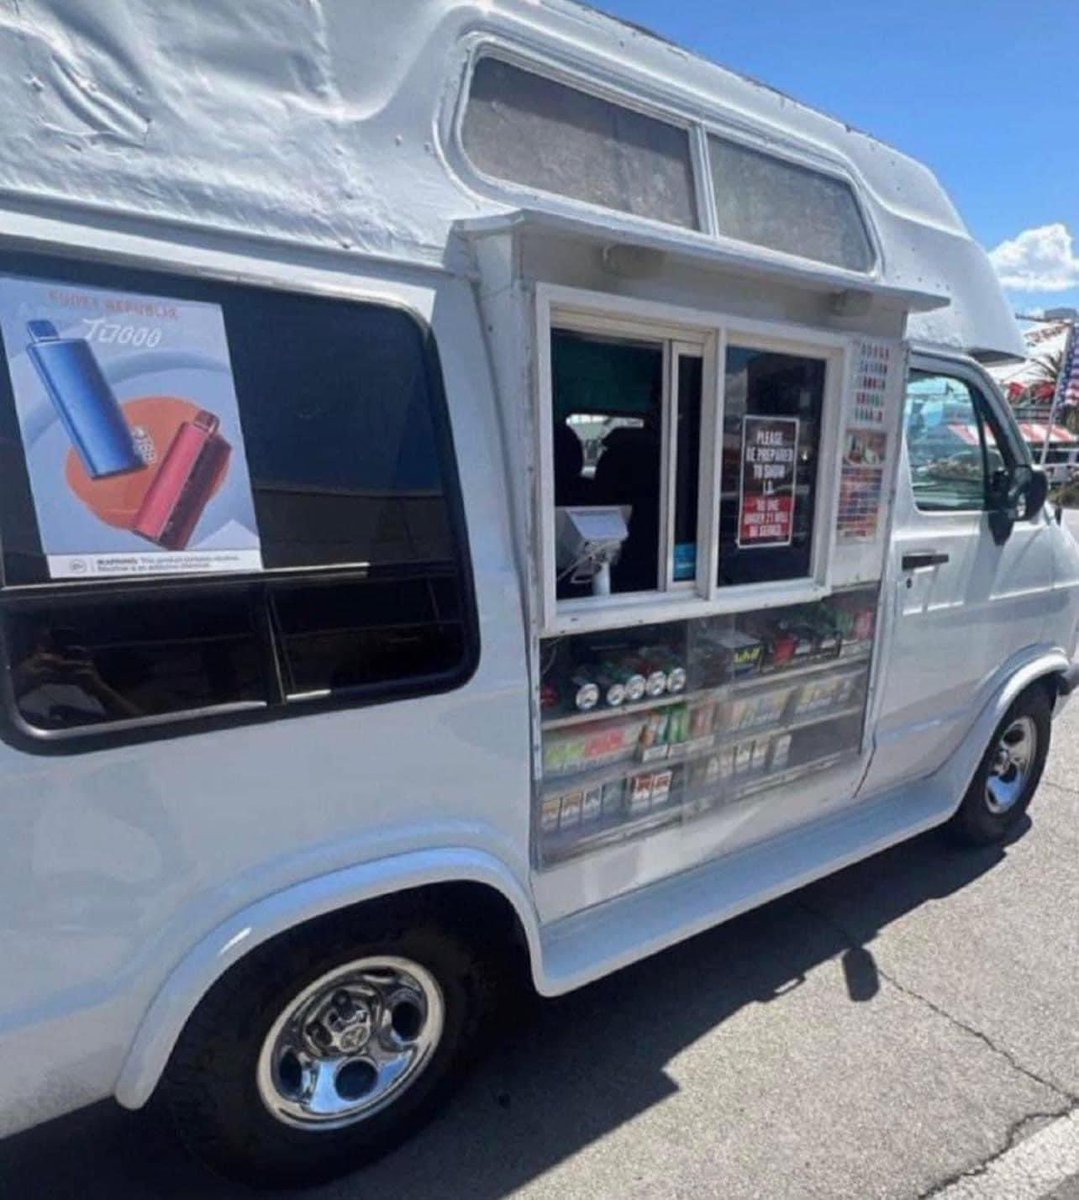 A vape truck?? Our country is doomed